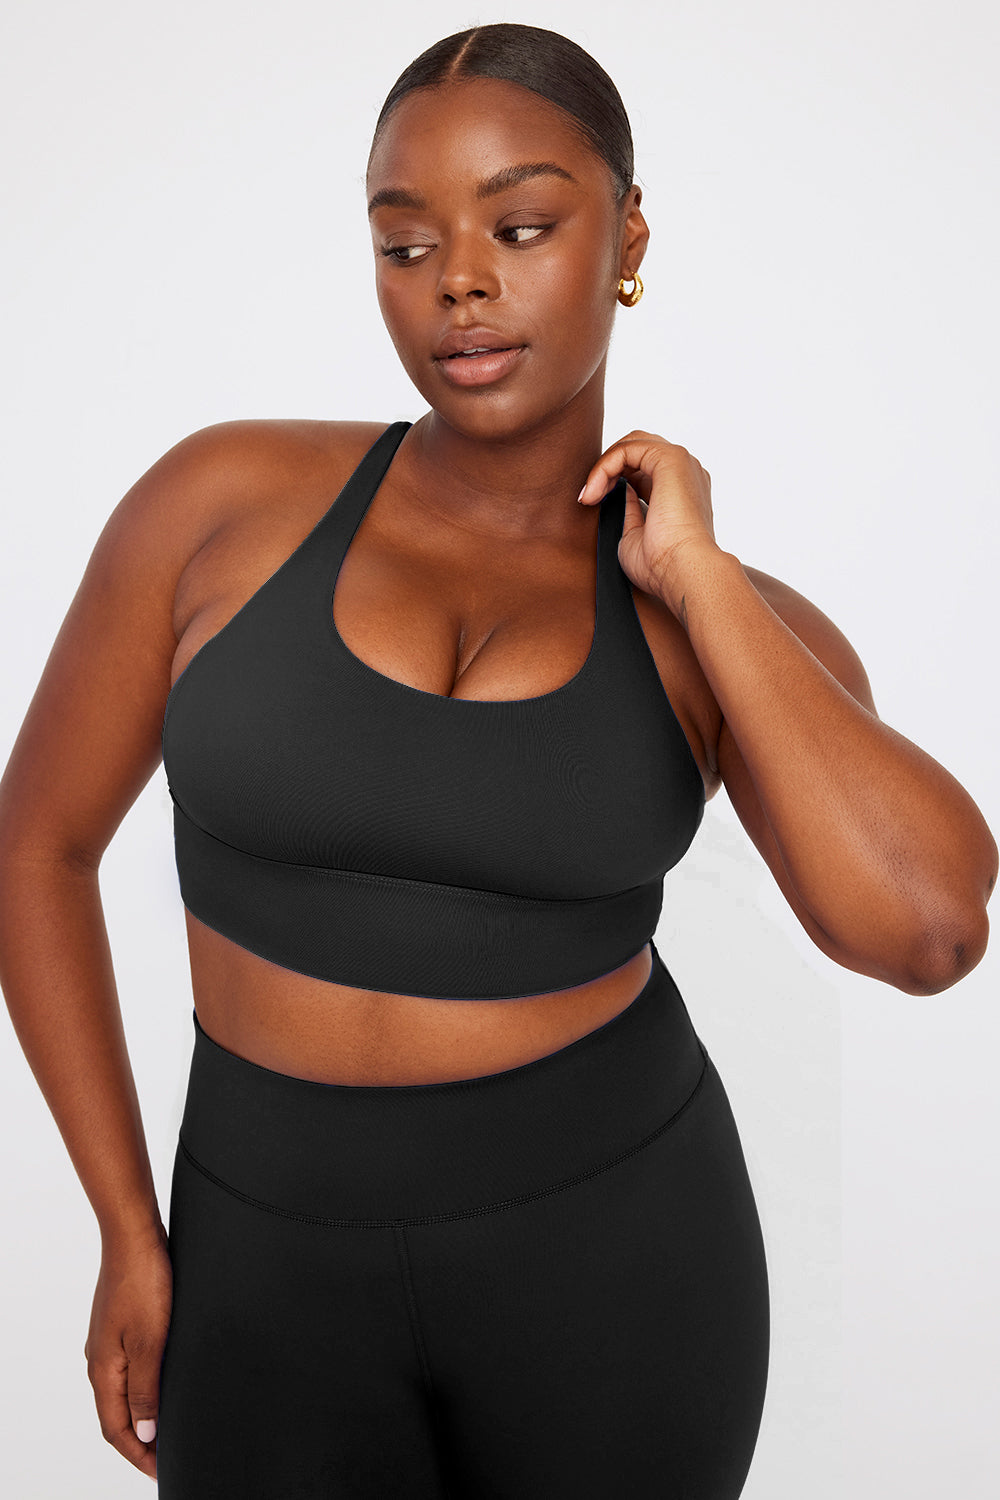 London-based activewear label Tala secures 4.2 million pounds in